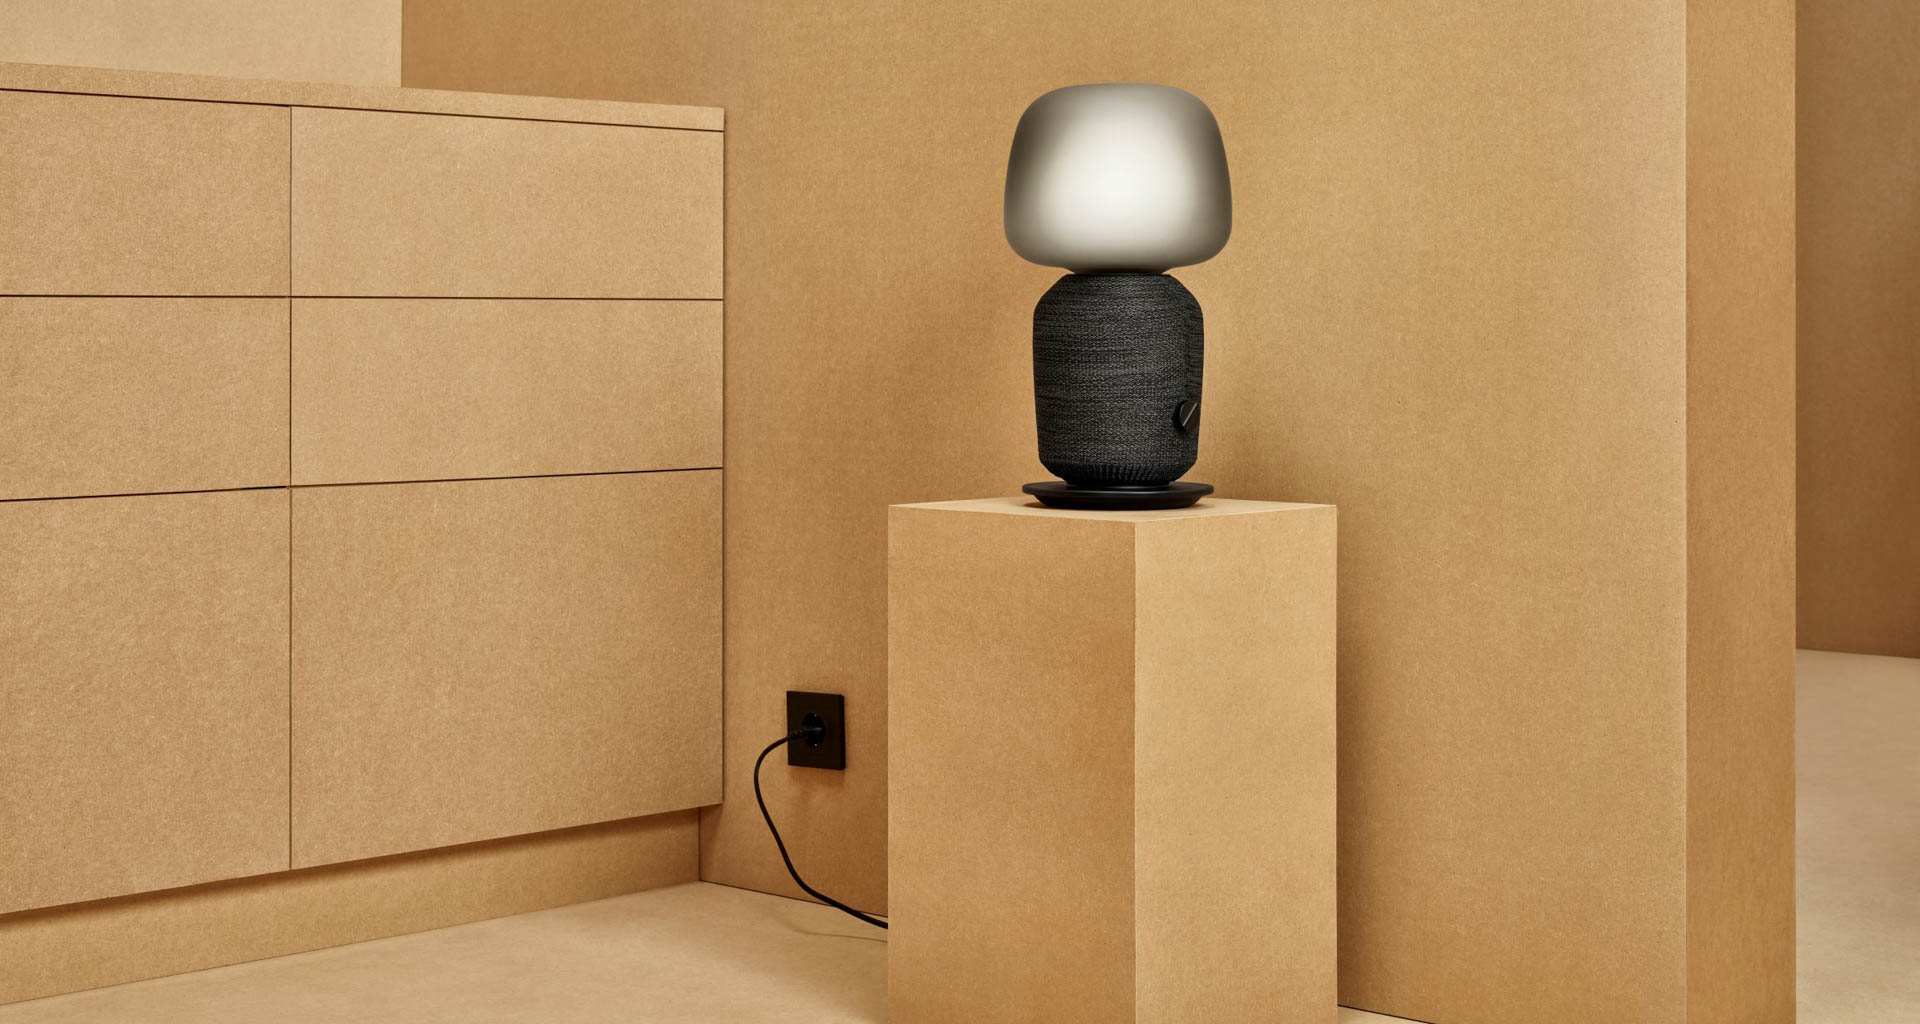 The combination table lamp and speaker product has a single power cord. Image: IKEA.